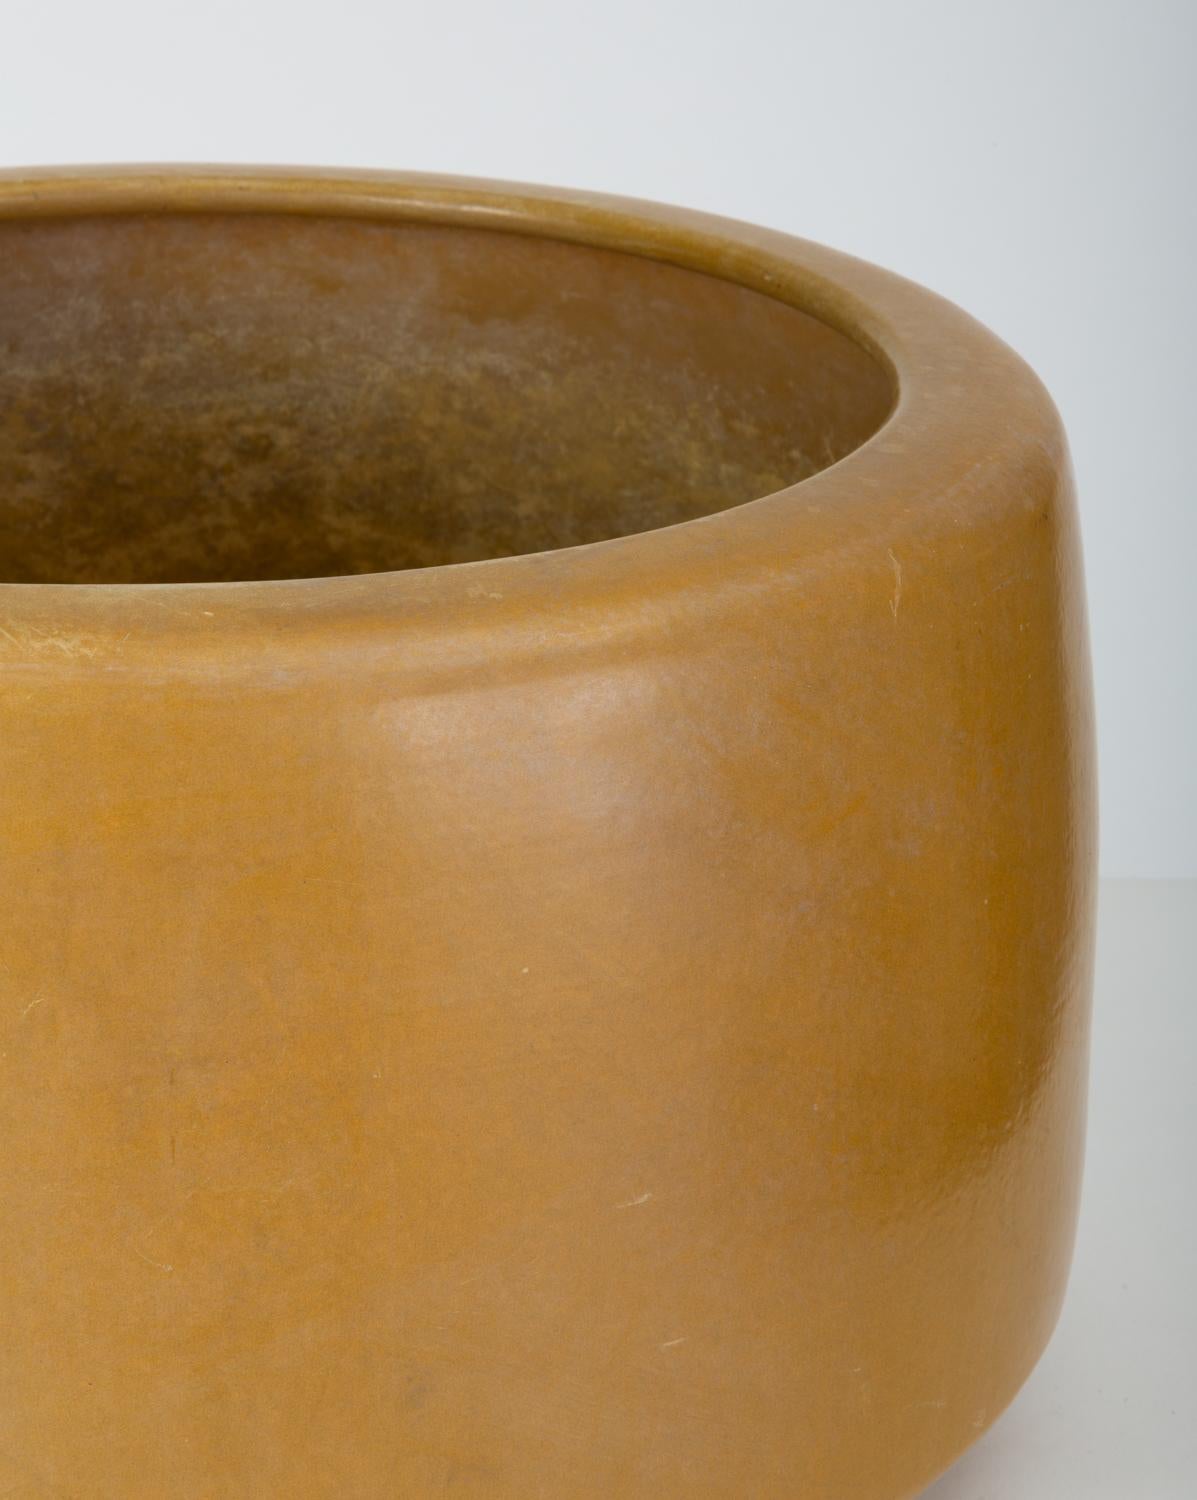 20th Century CP-17 Tire Planter by John Follis for Architectural Pottery in Yellow Glaze